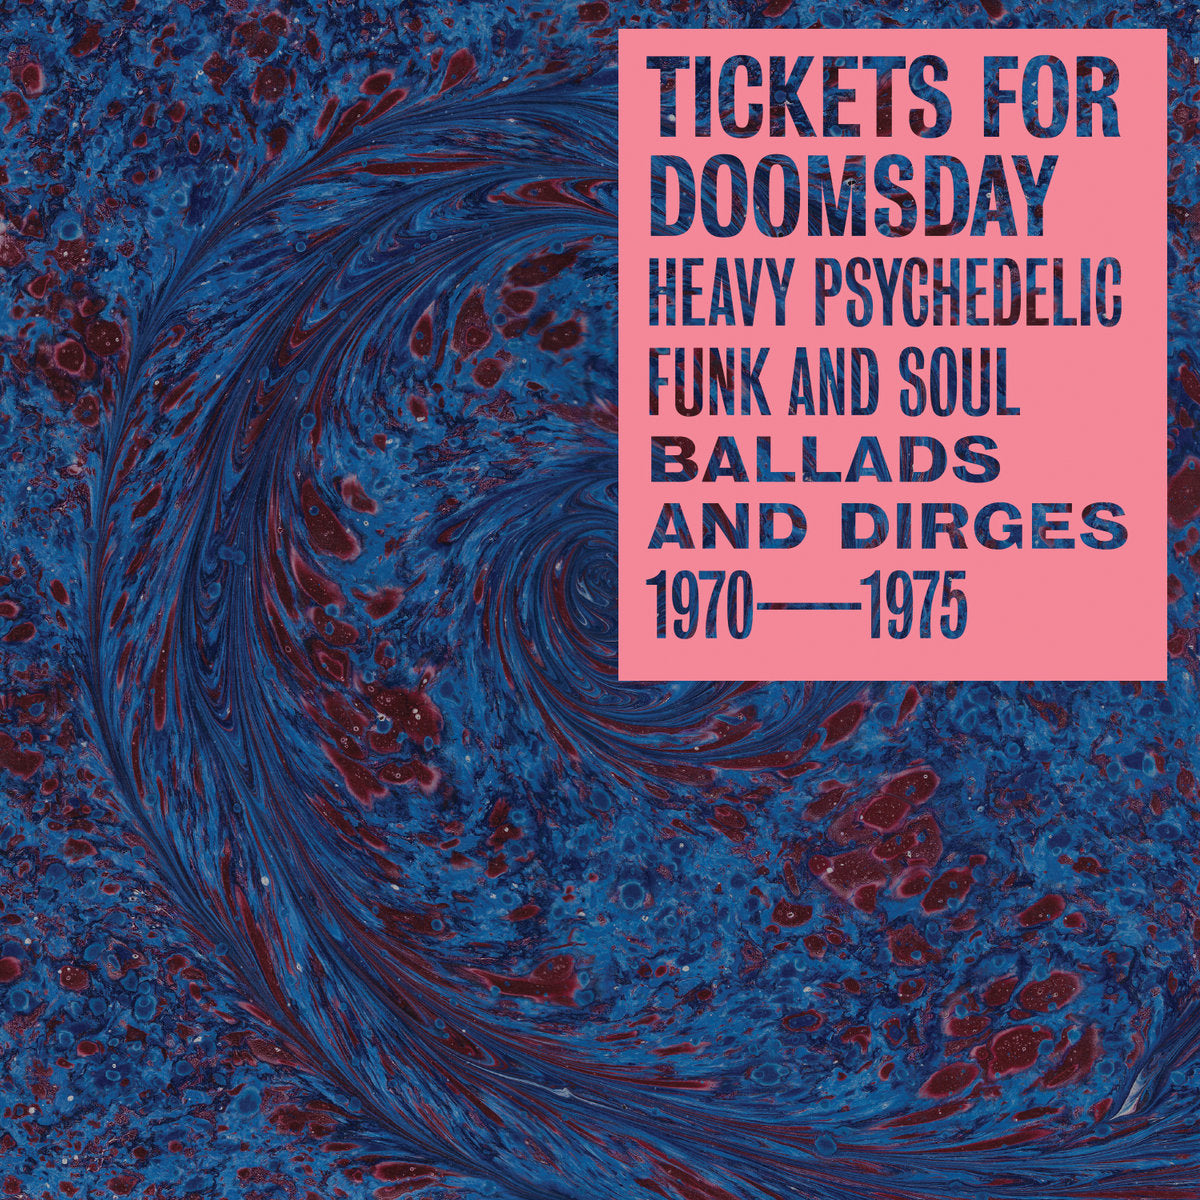 Tickets For Doomsday Heavy Psychedelic Soul: Ballads & Dirges 1970 - 1975 - Various Artists